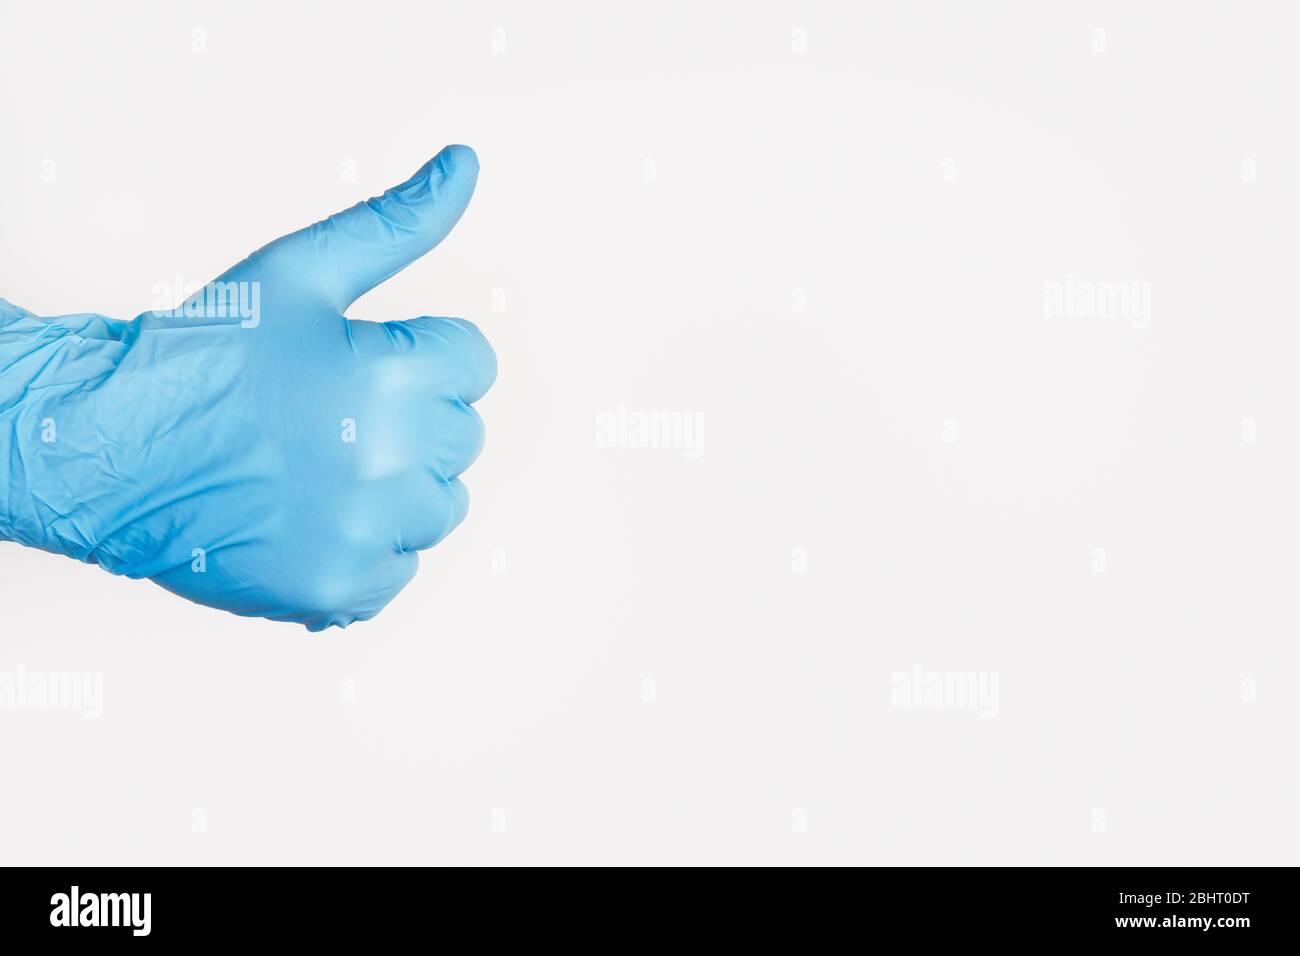 Hand In Medical Glove Showing Thumb Up On white Background. Copy space Stock Photo